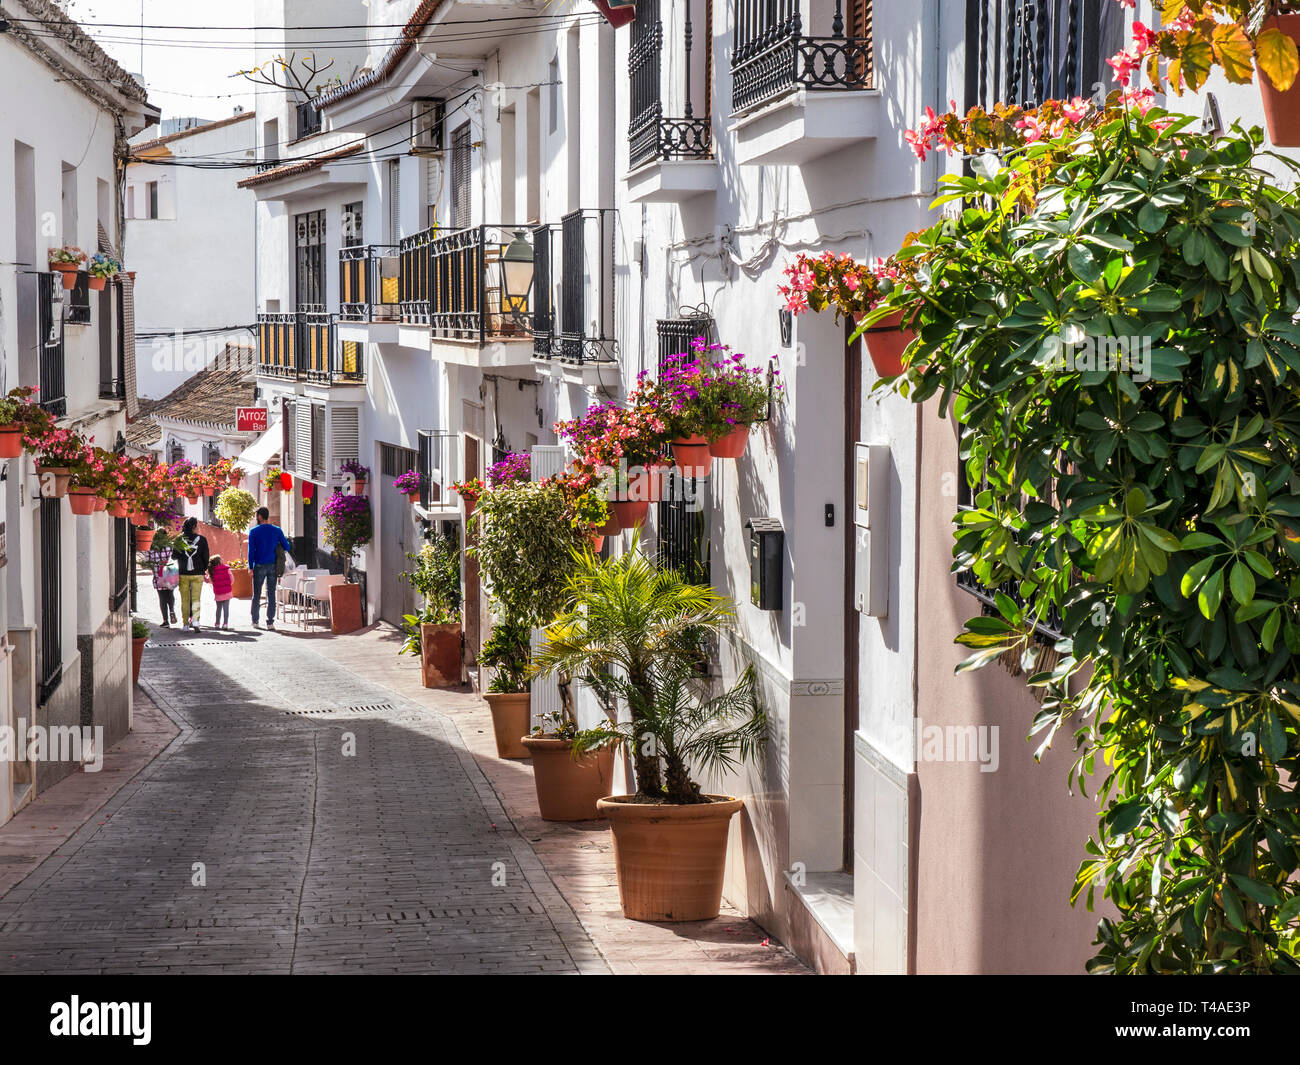 estepona-old-town-with-white-washed-buildings-and-traditional-potted-geraniums-family-explorin...jpg